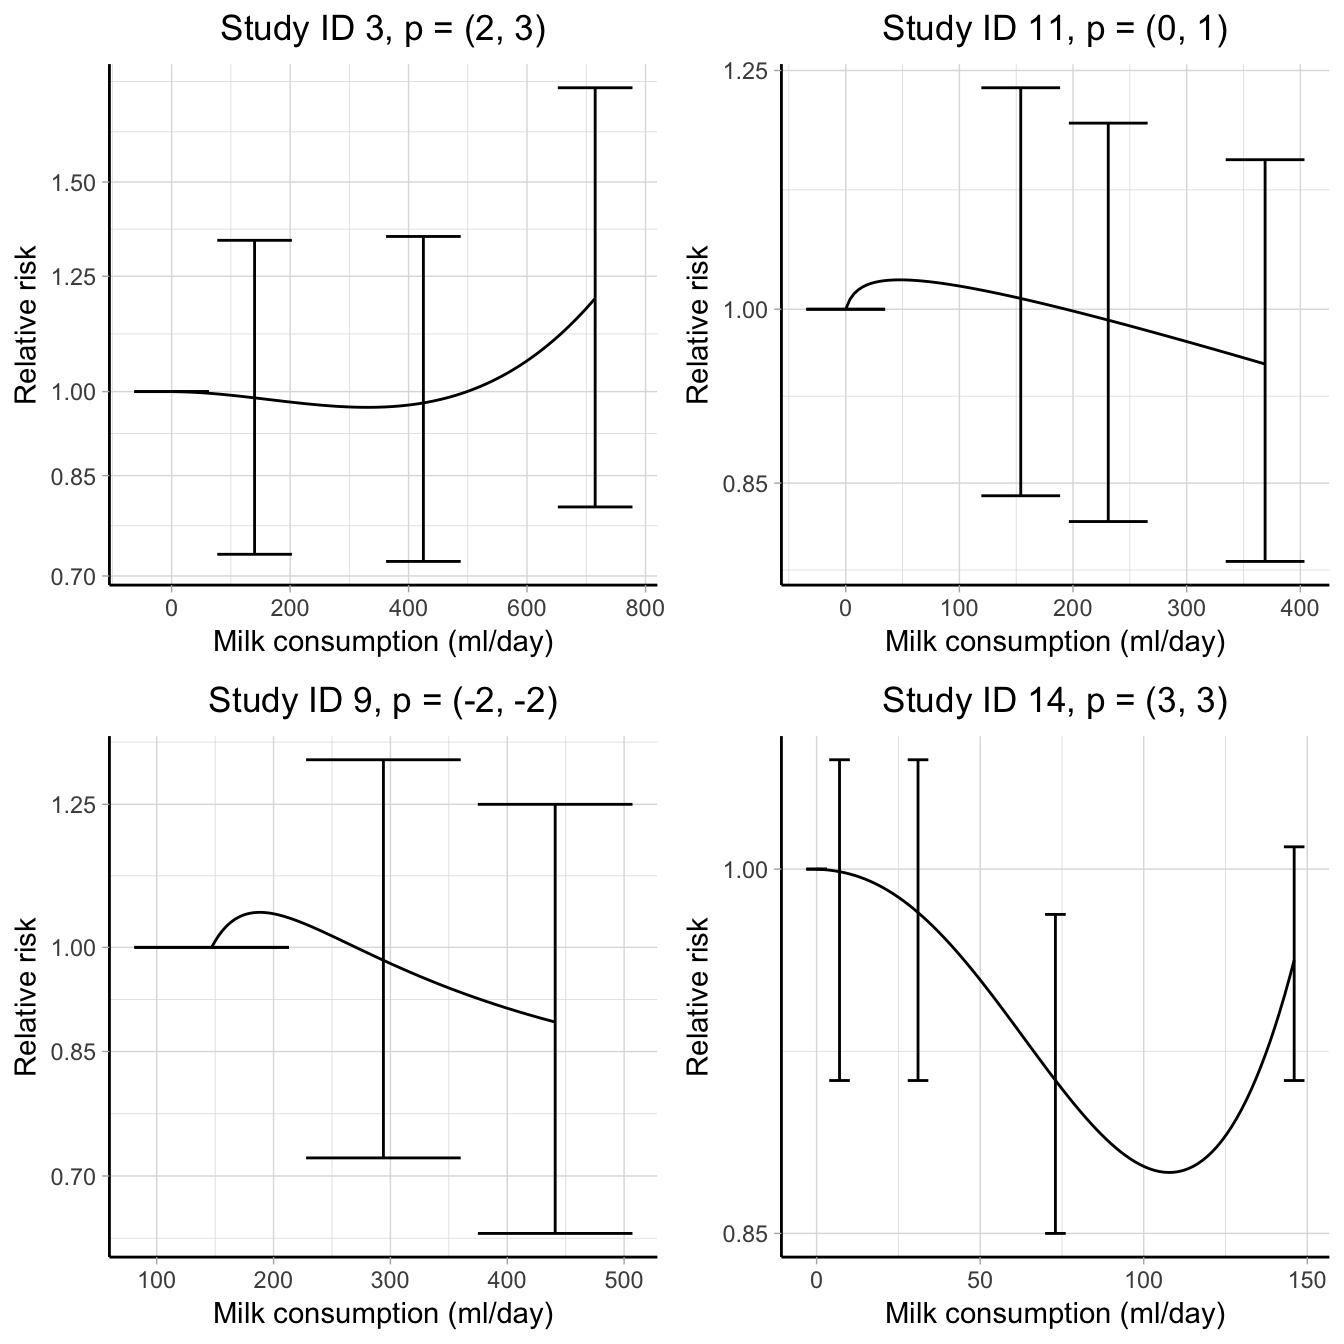 Dose--response associations between milk consumption (ml/day) and all-cause mortality in 4 studies. The curves are modelled using fractional polynomials with the sets of power terms $p$ (reported in the title) chosen by maximizing the study-specific likelihoods. The results are presented on the log scale using the observed reference values as comparators.